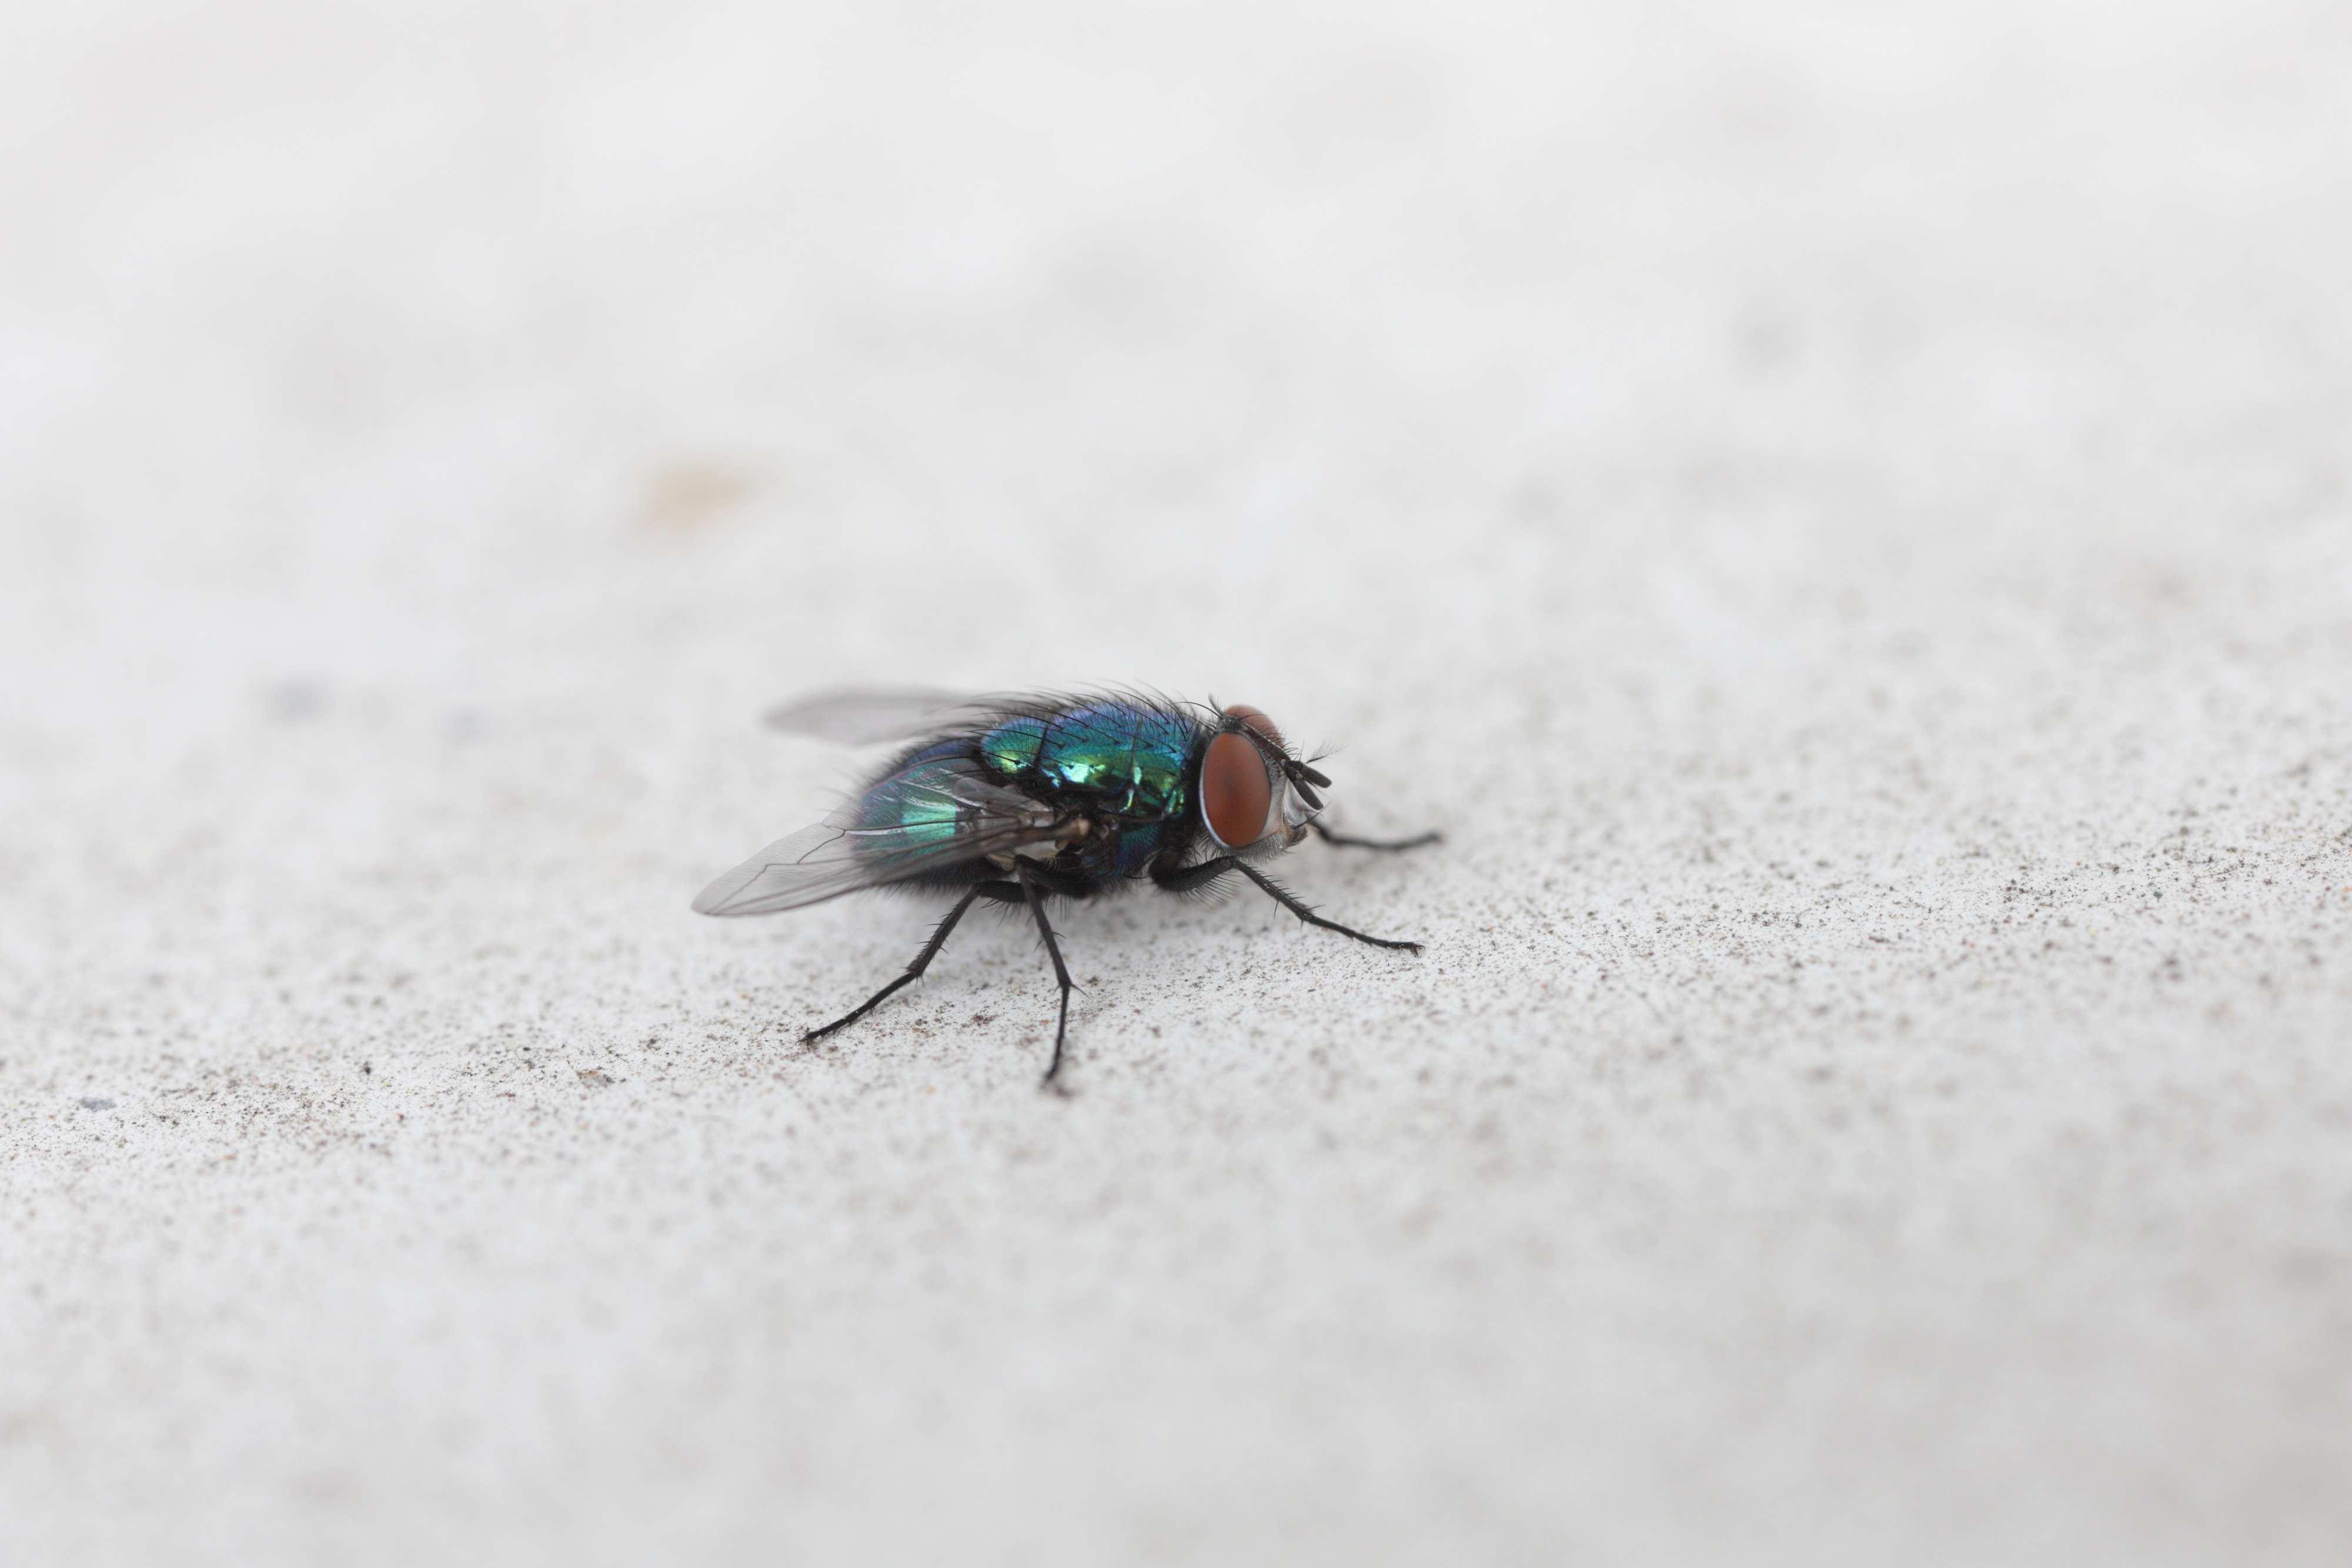 Common green bottle fly (blow fly, Lucilia sericata).